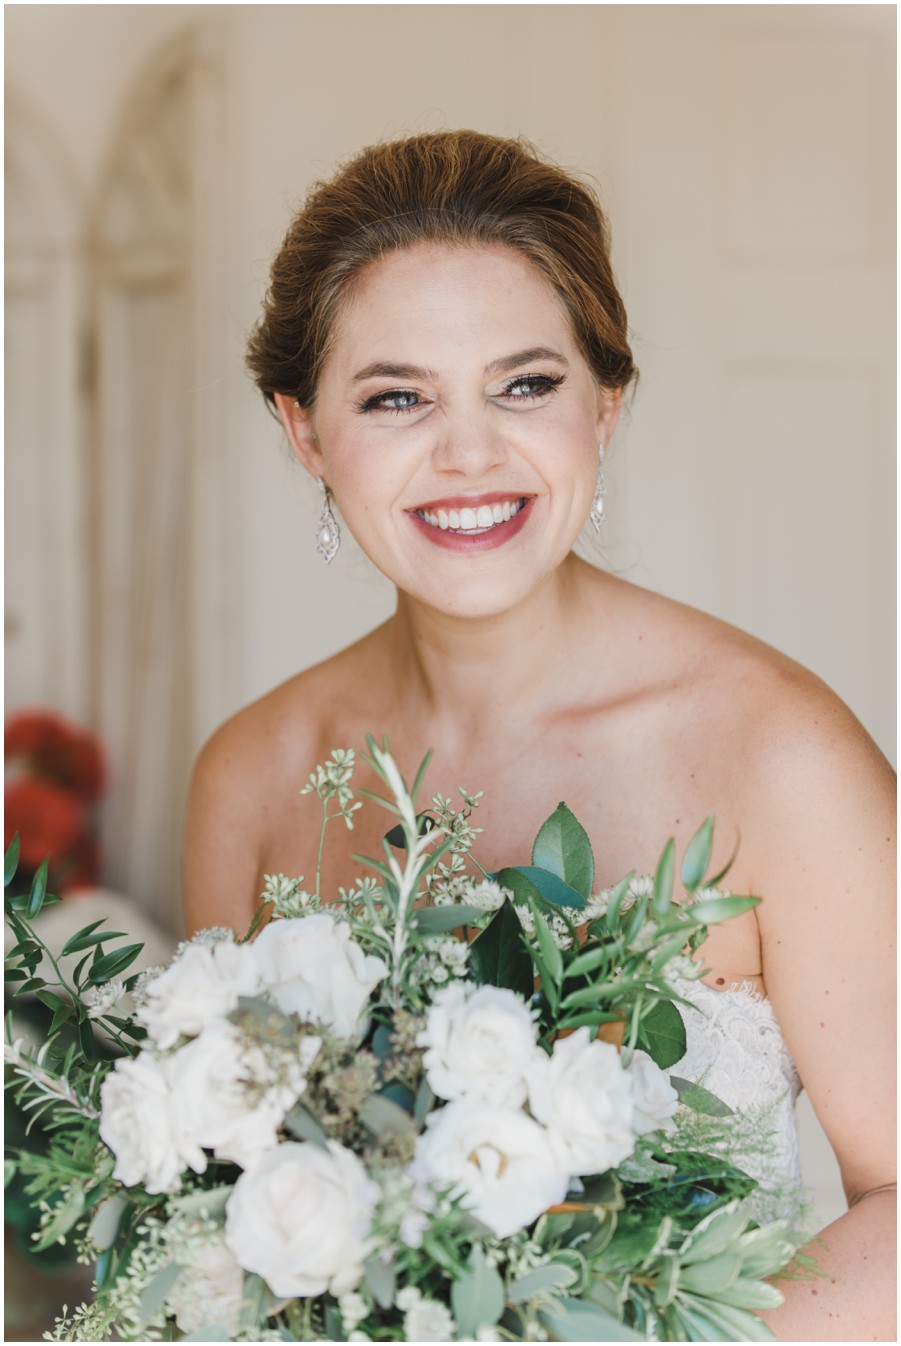 Pretty bride at The Oaks Waterfront Inn at St. Micheals, MD by Melissa Grimes-Guy Photography